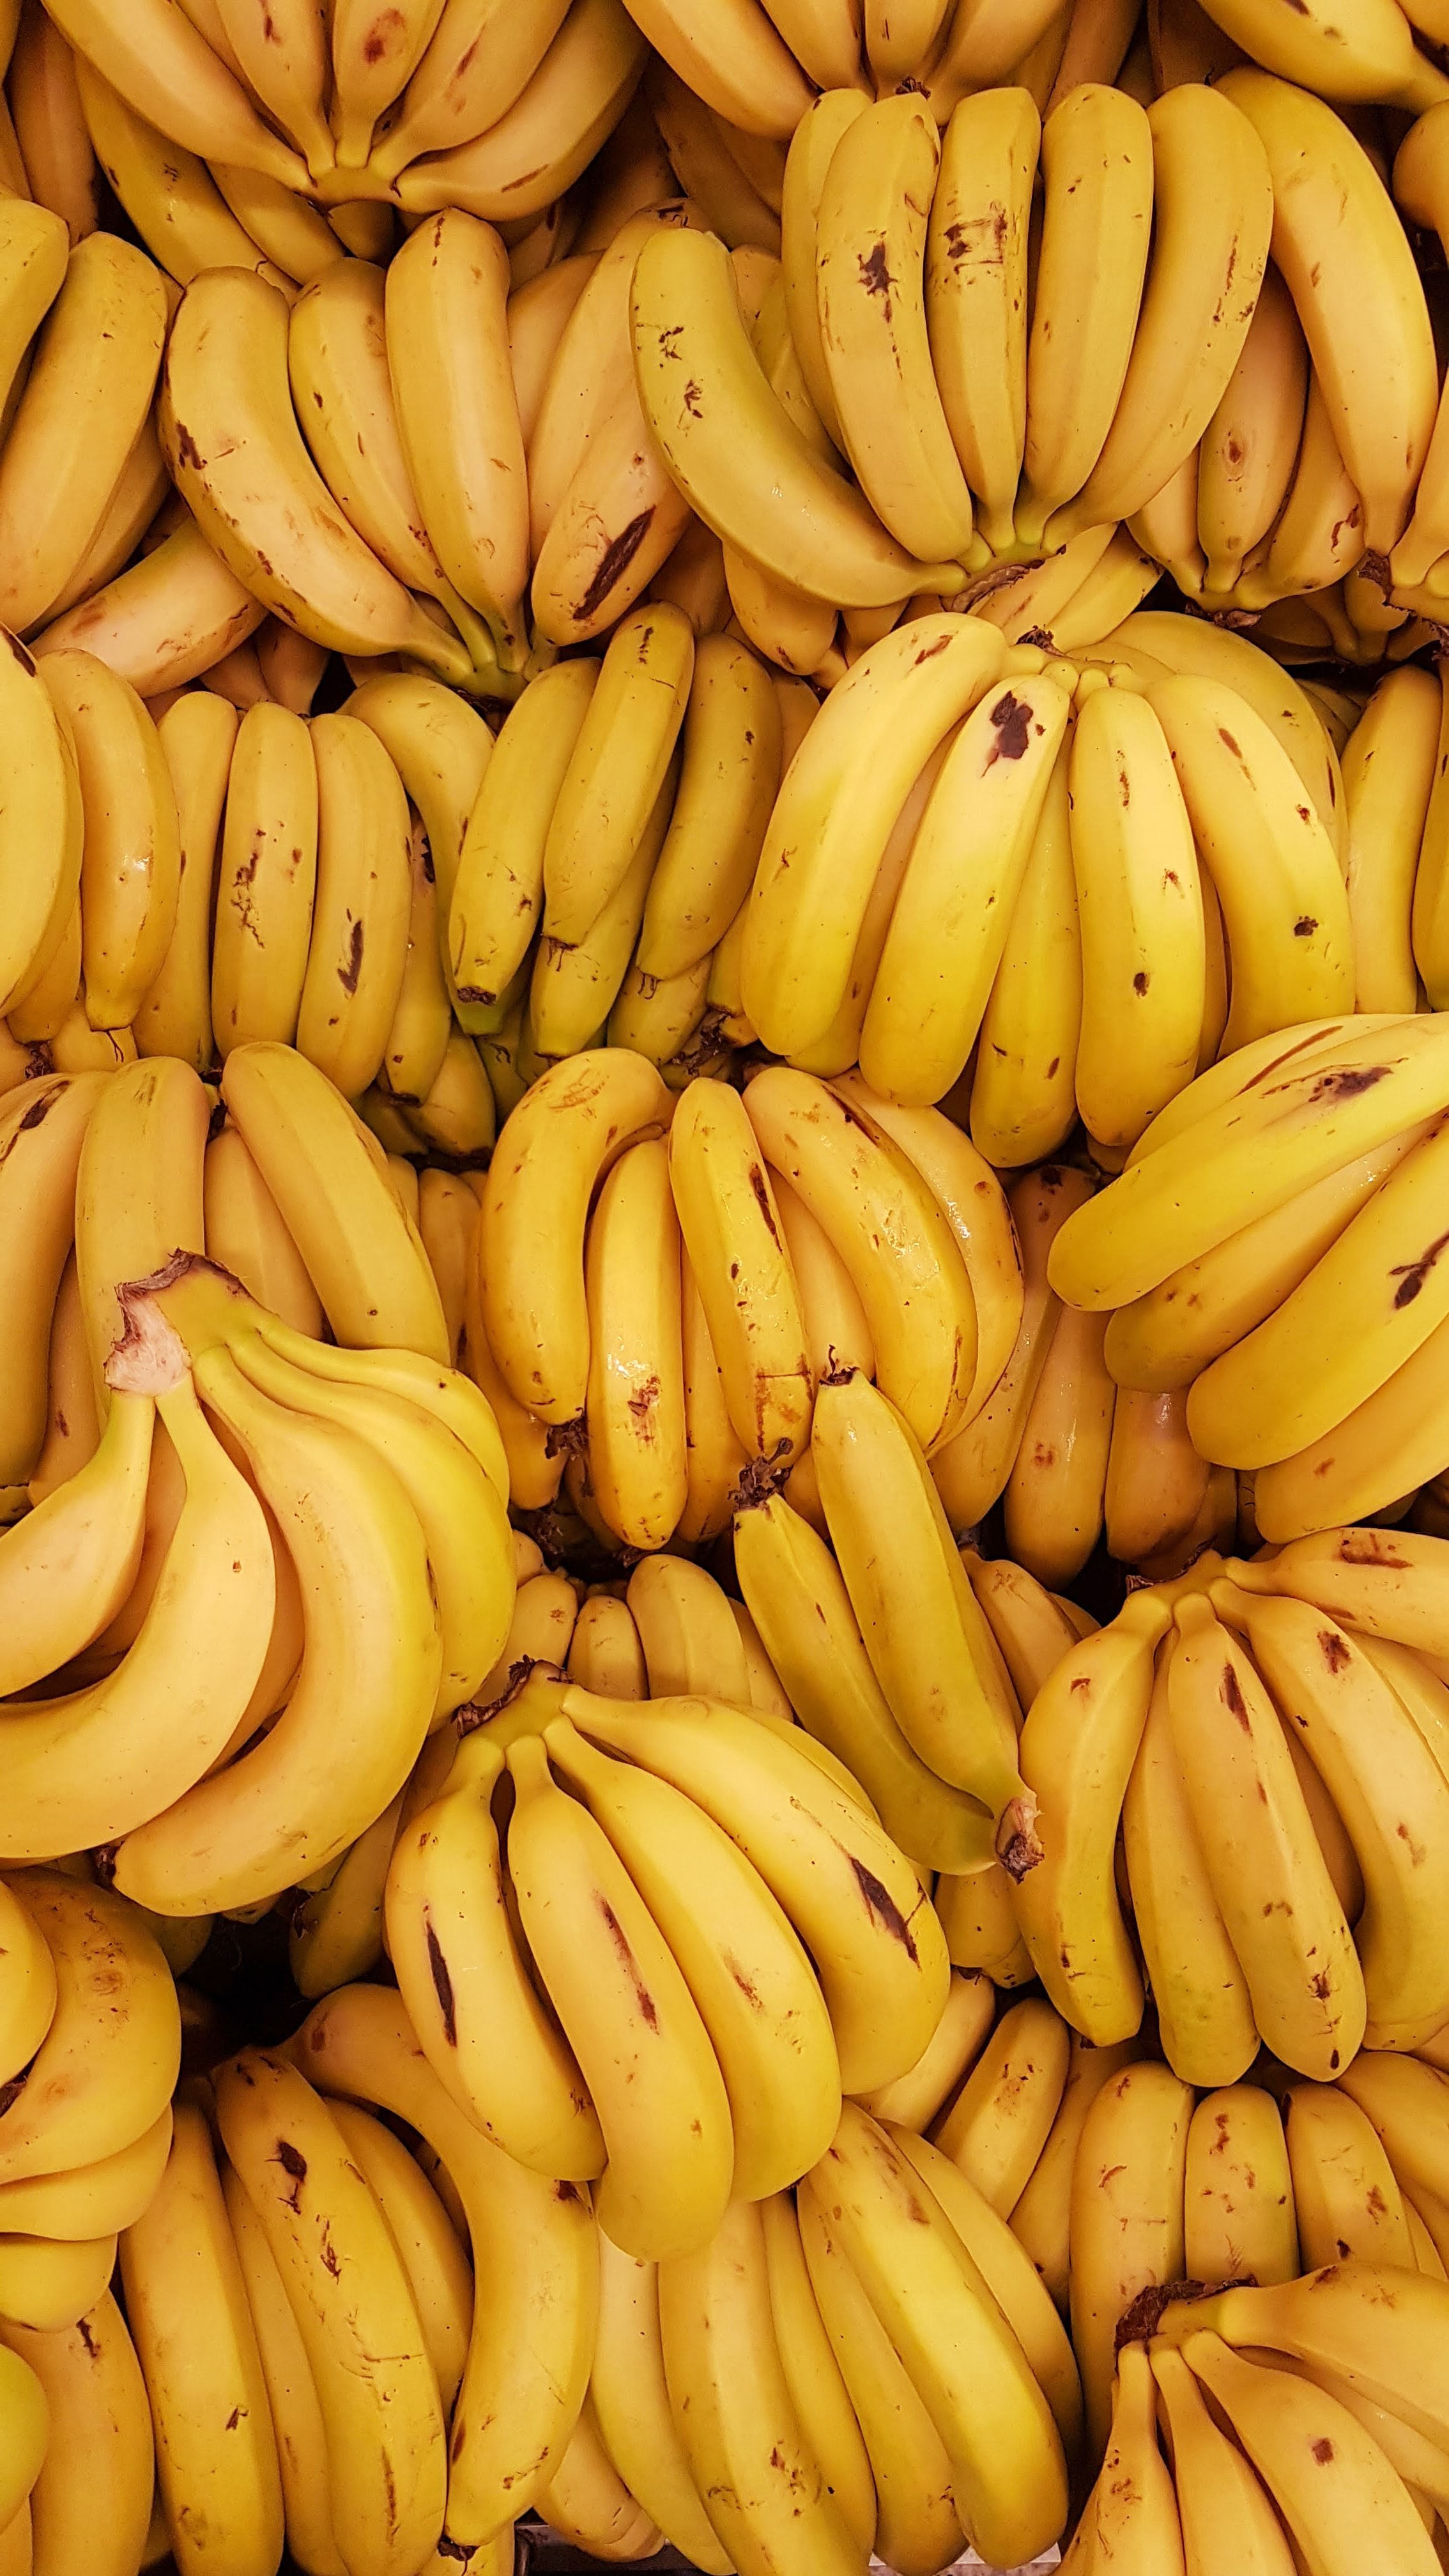 106222 Screensavers and Wallpapers Bananas for phone. Download fruits, food, bananas, yellow, bunches, clusters pictures for free